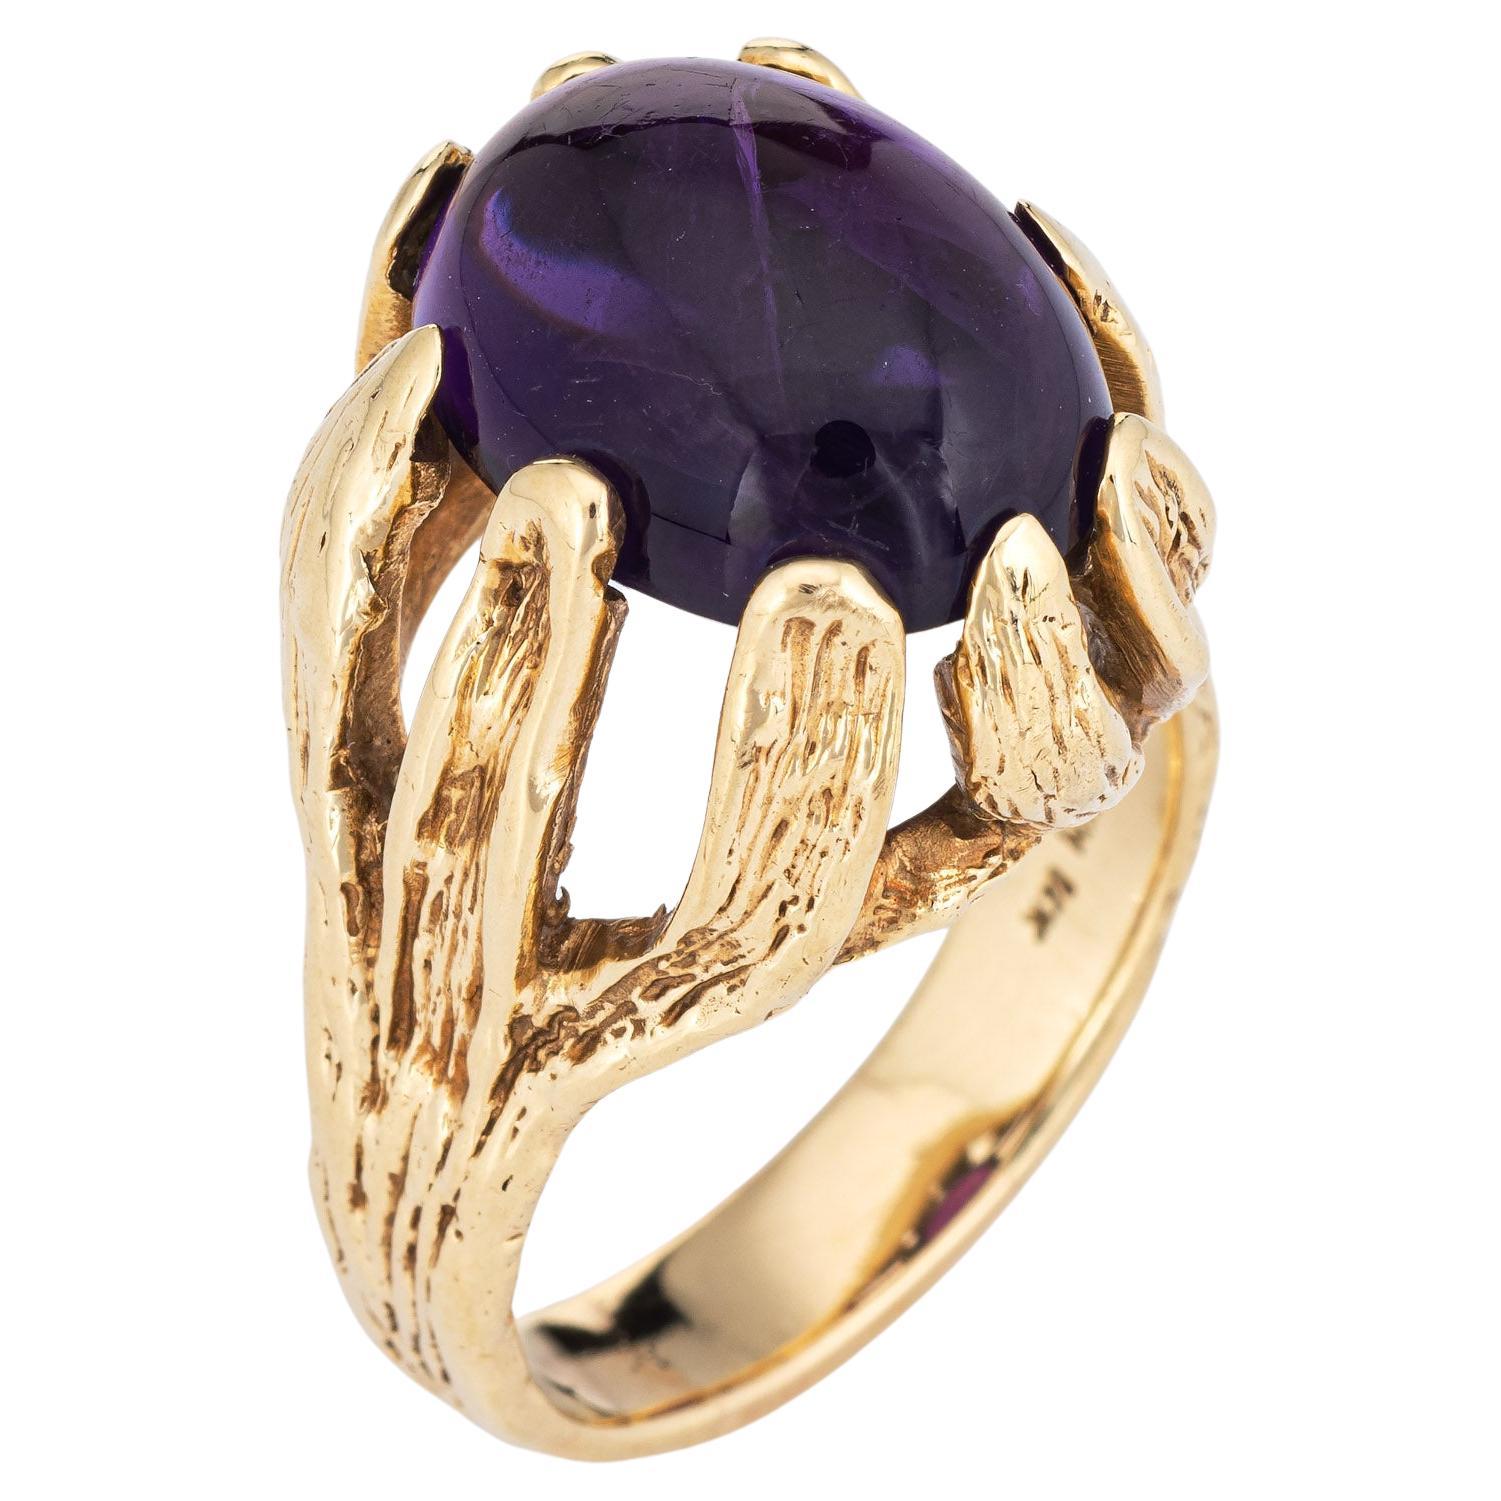 Vintage 70s Amethyst Ring 14k Yellow Gold Large Cocktail Jewelry For Sale